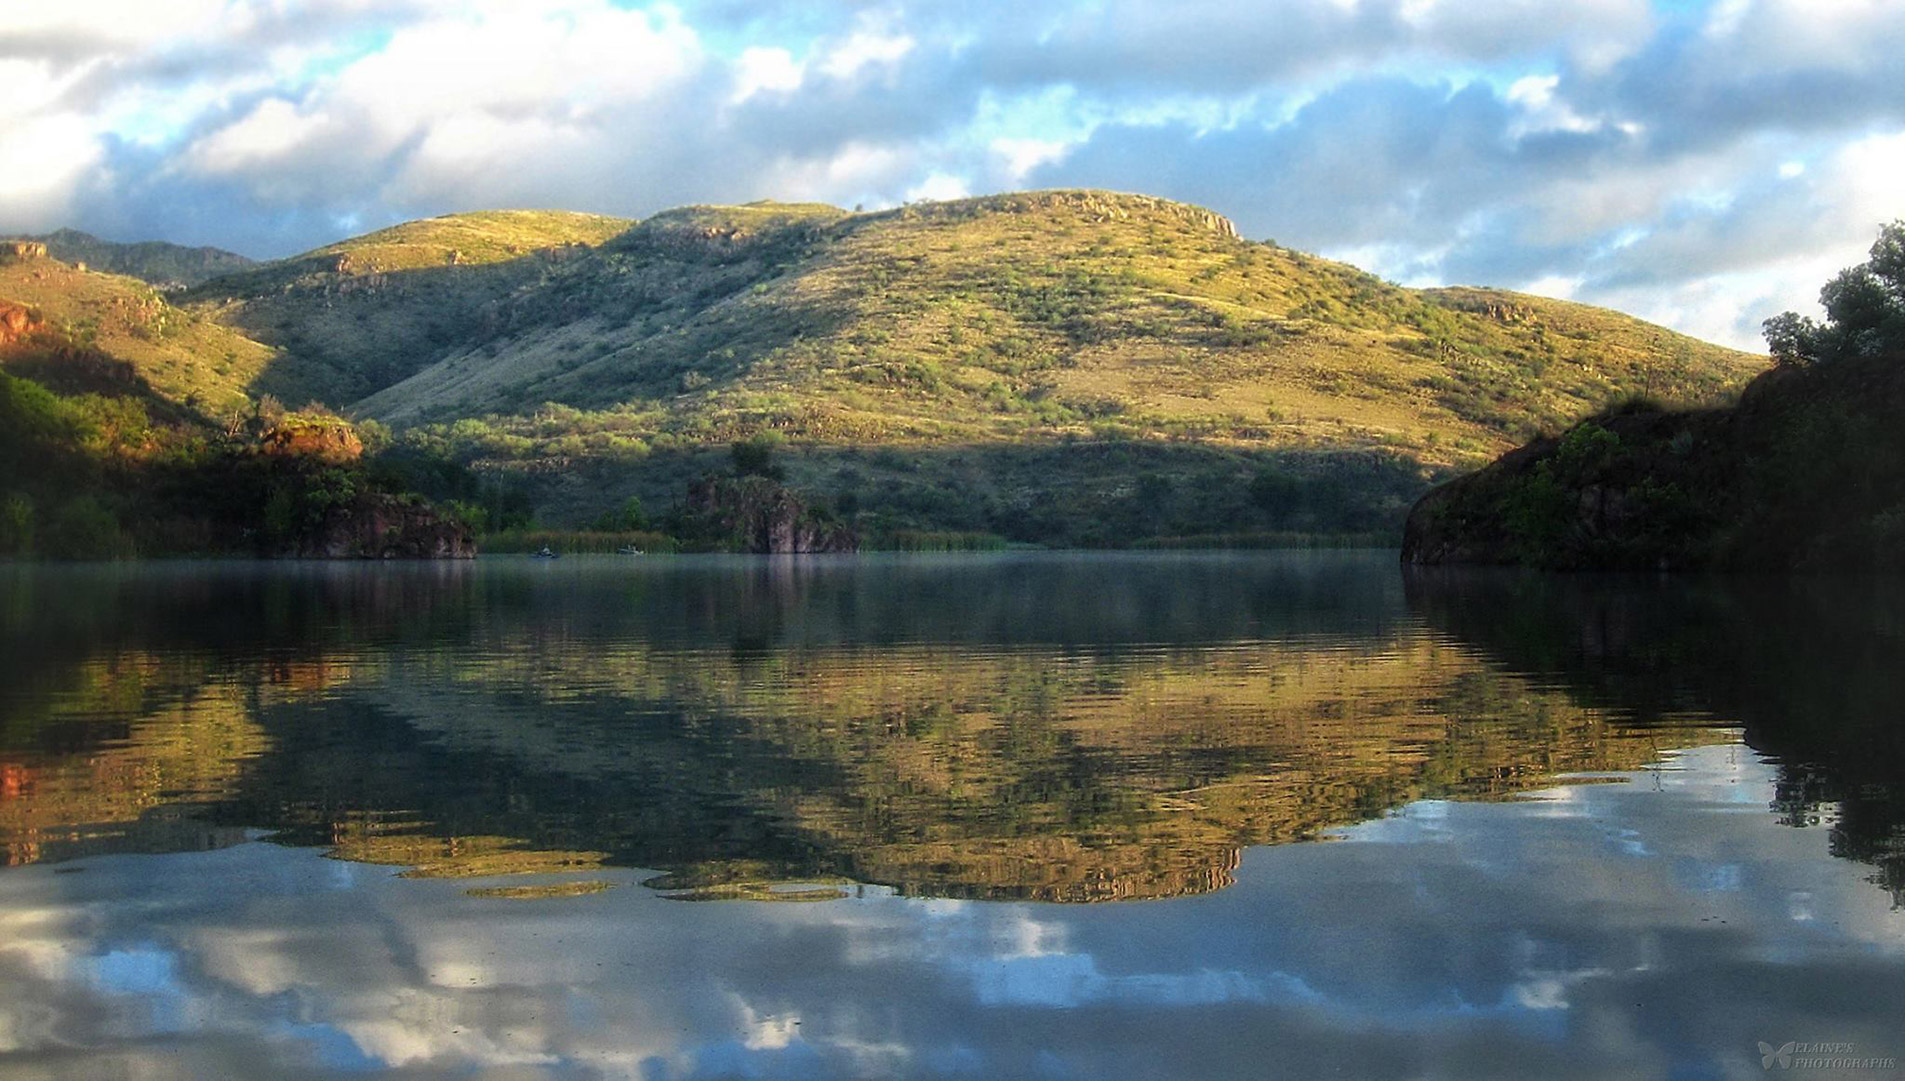 A reflection of the illuminated  hillside in the calm, still waters of Pena Blanca Lake.